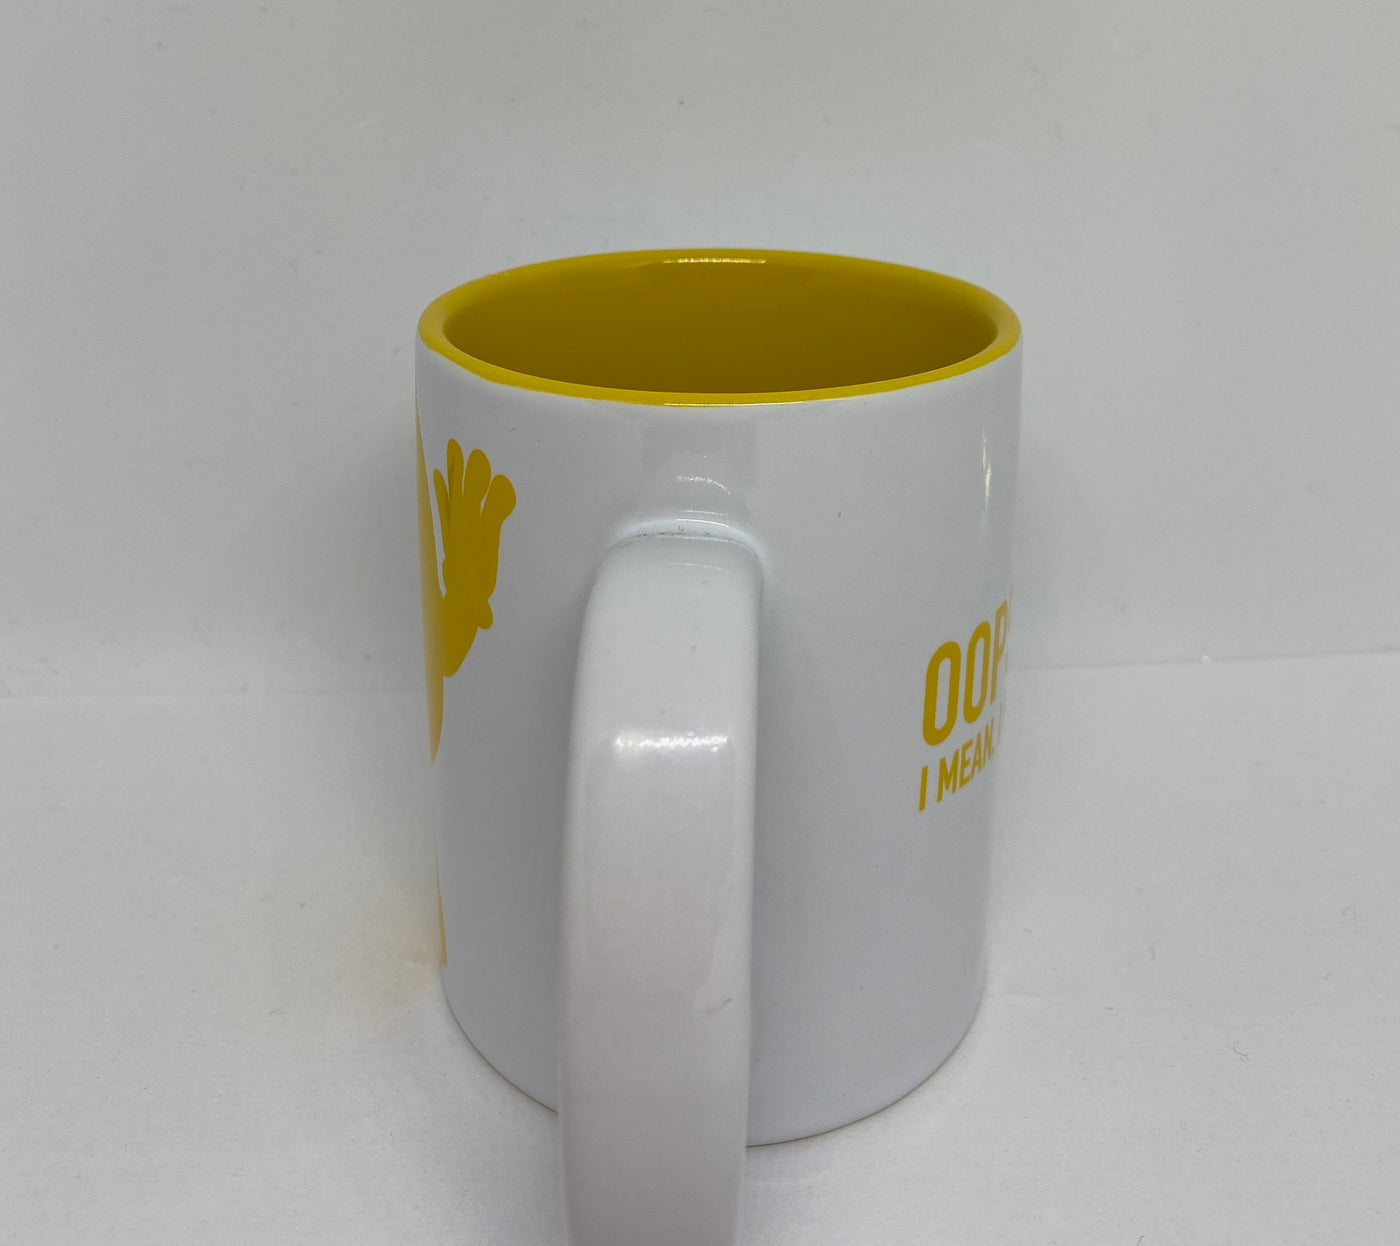 M&M's World Yellow Silhouette Oops I Mean I Meant to do That Coffee Mug New